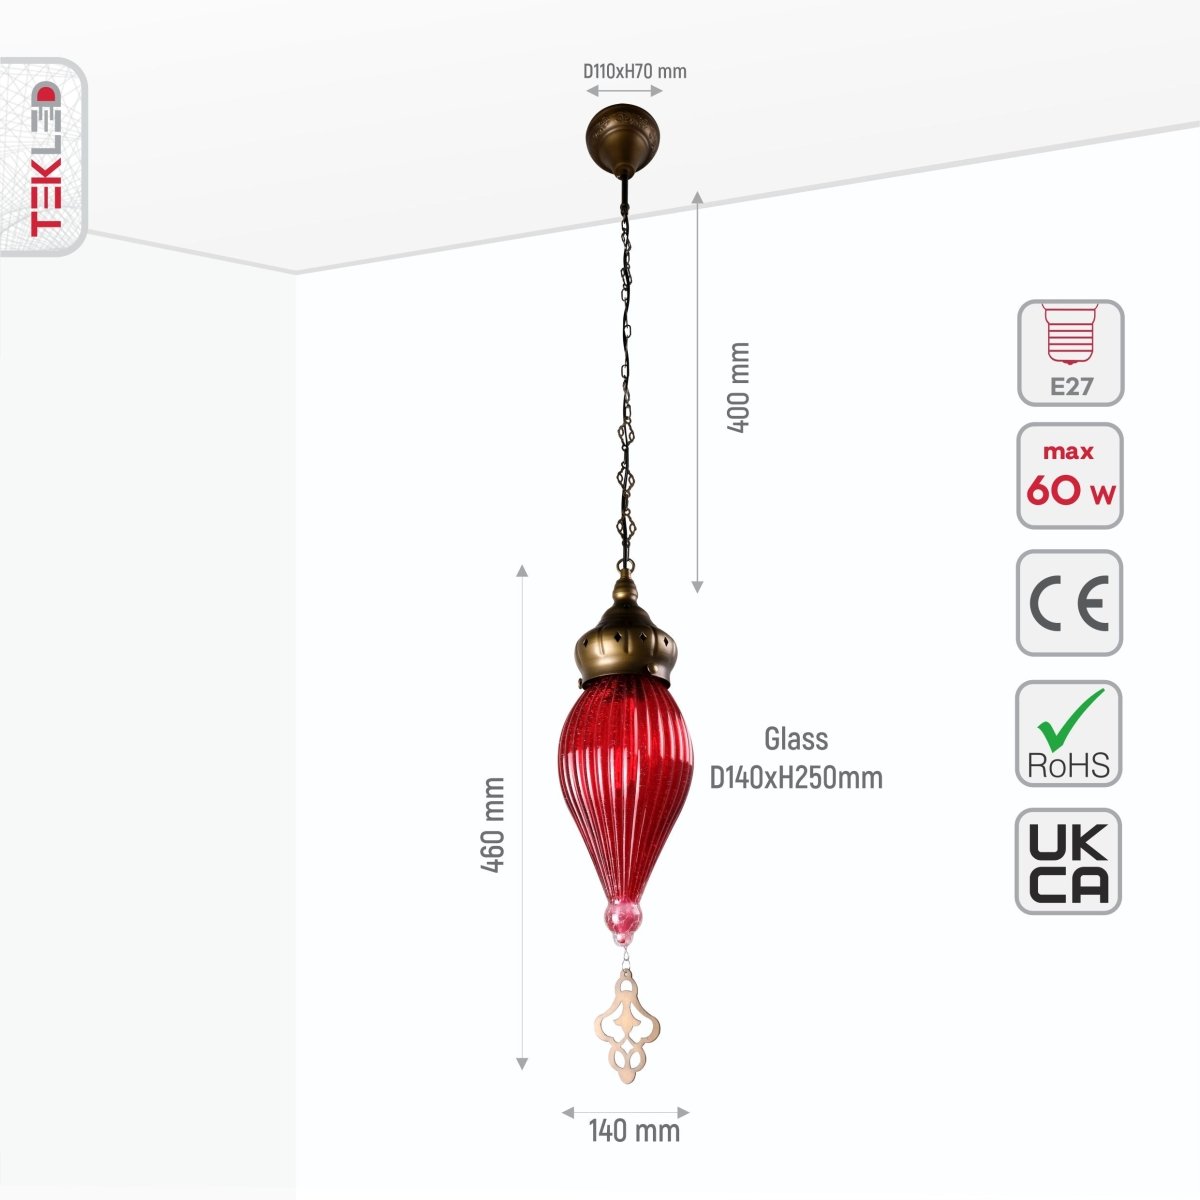 Size and specs of Moroccan Style Antique Brass and Red Glass Pendant Light E27 | TEKLED 158-19558